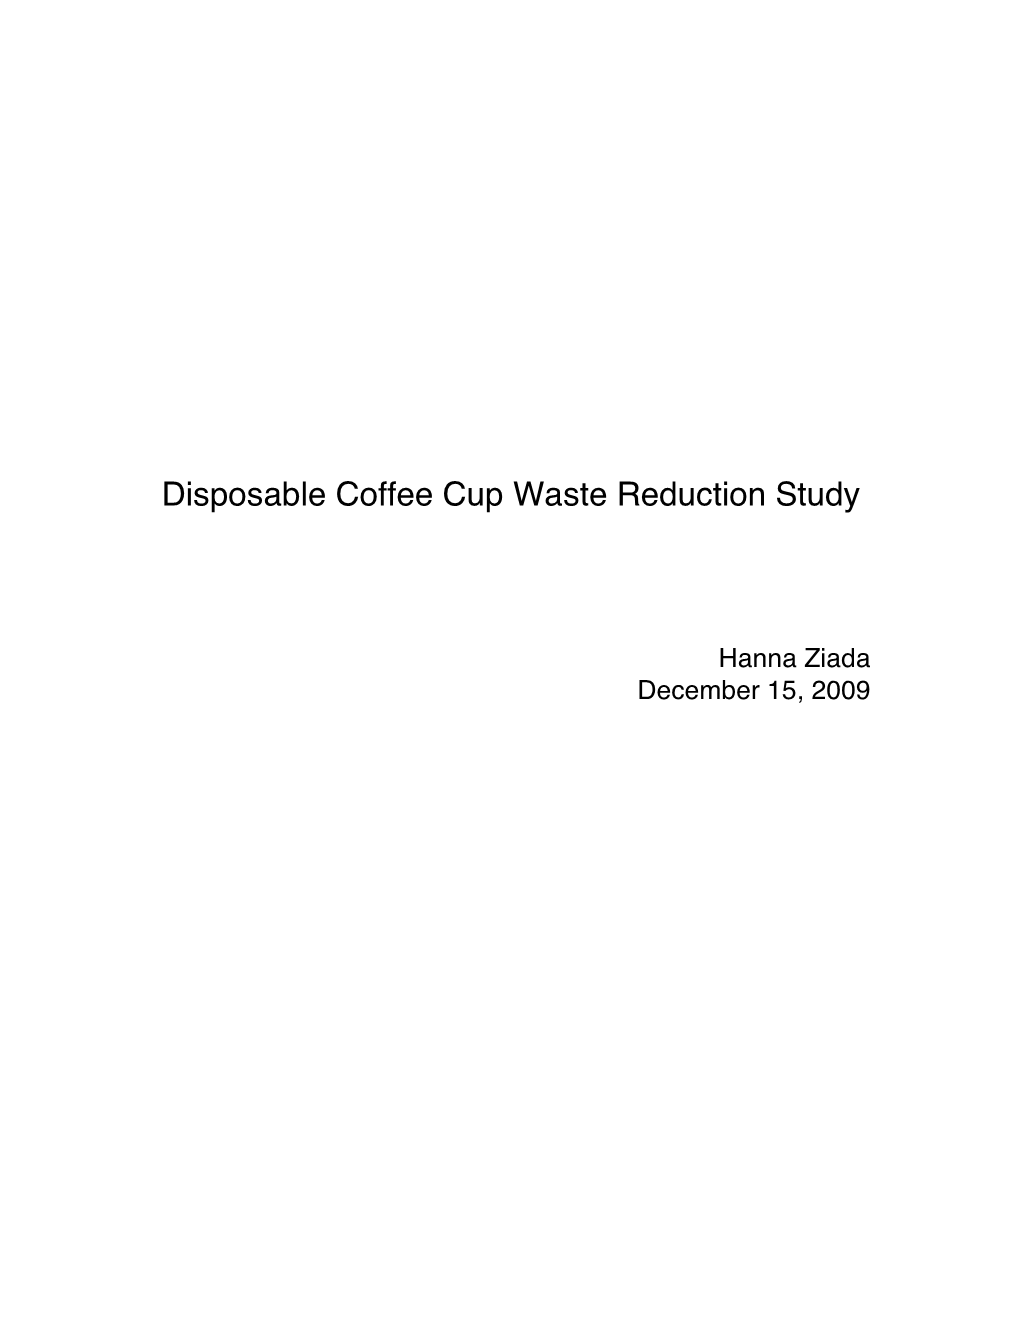 Disposable Coffee Cup Waste Reduction Study